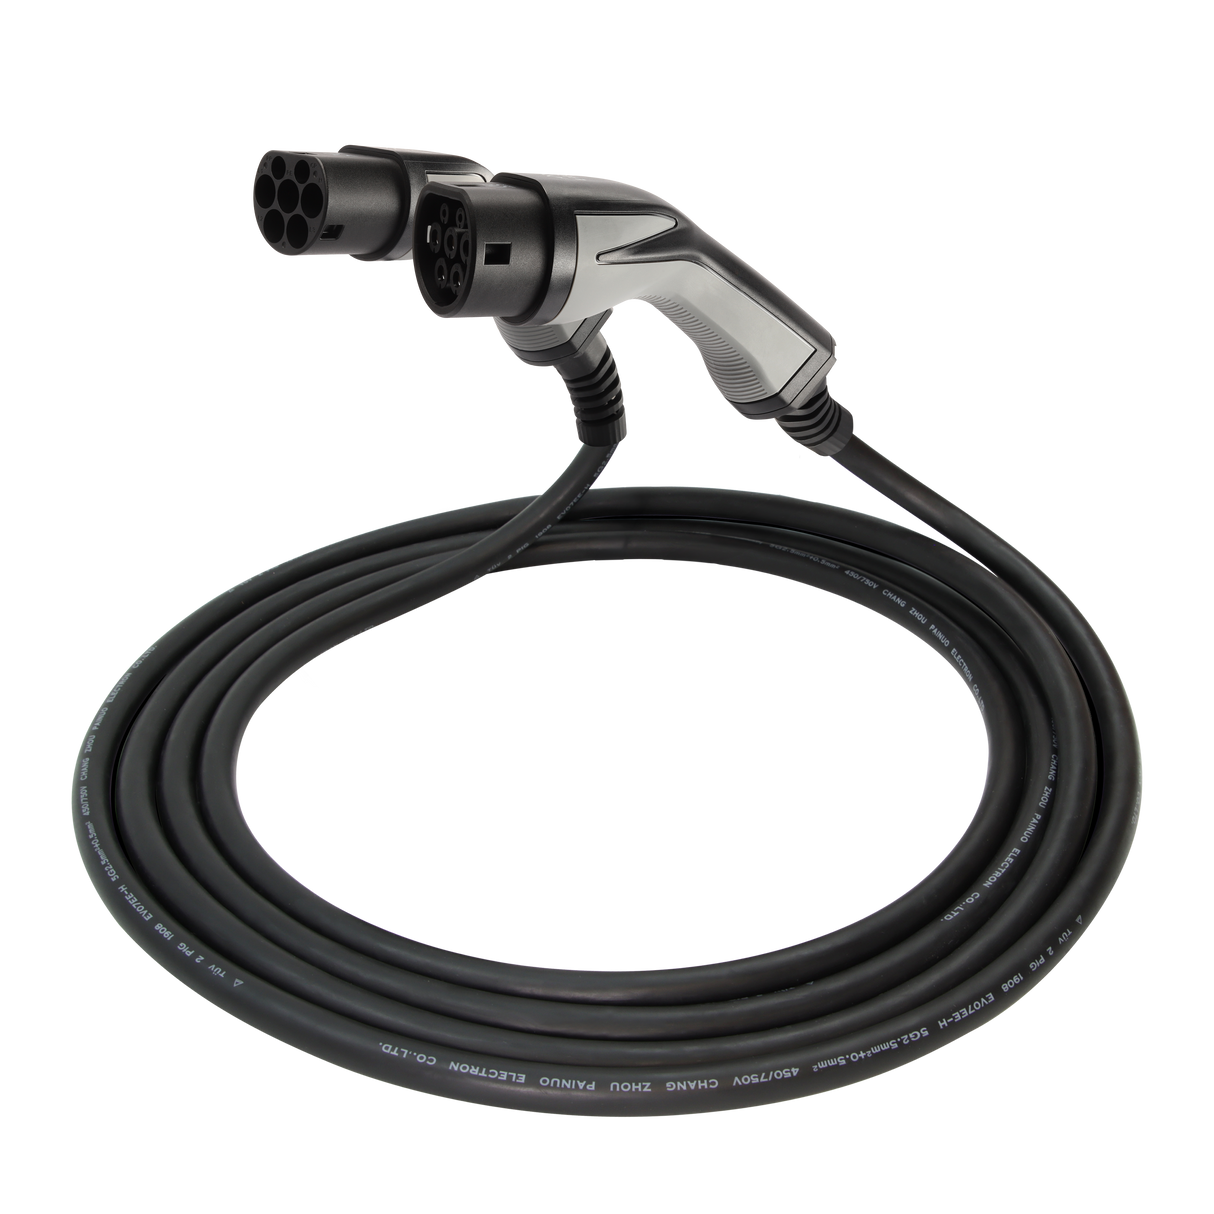 Charging cable Kia Xceed - Erock Pro Type 2 - 16A 1 phase (3.7 kW)